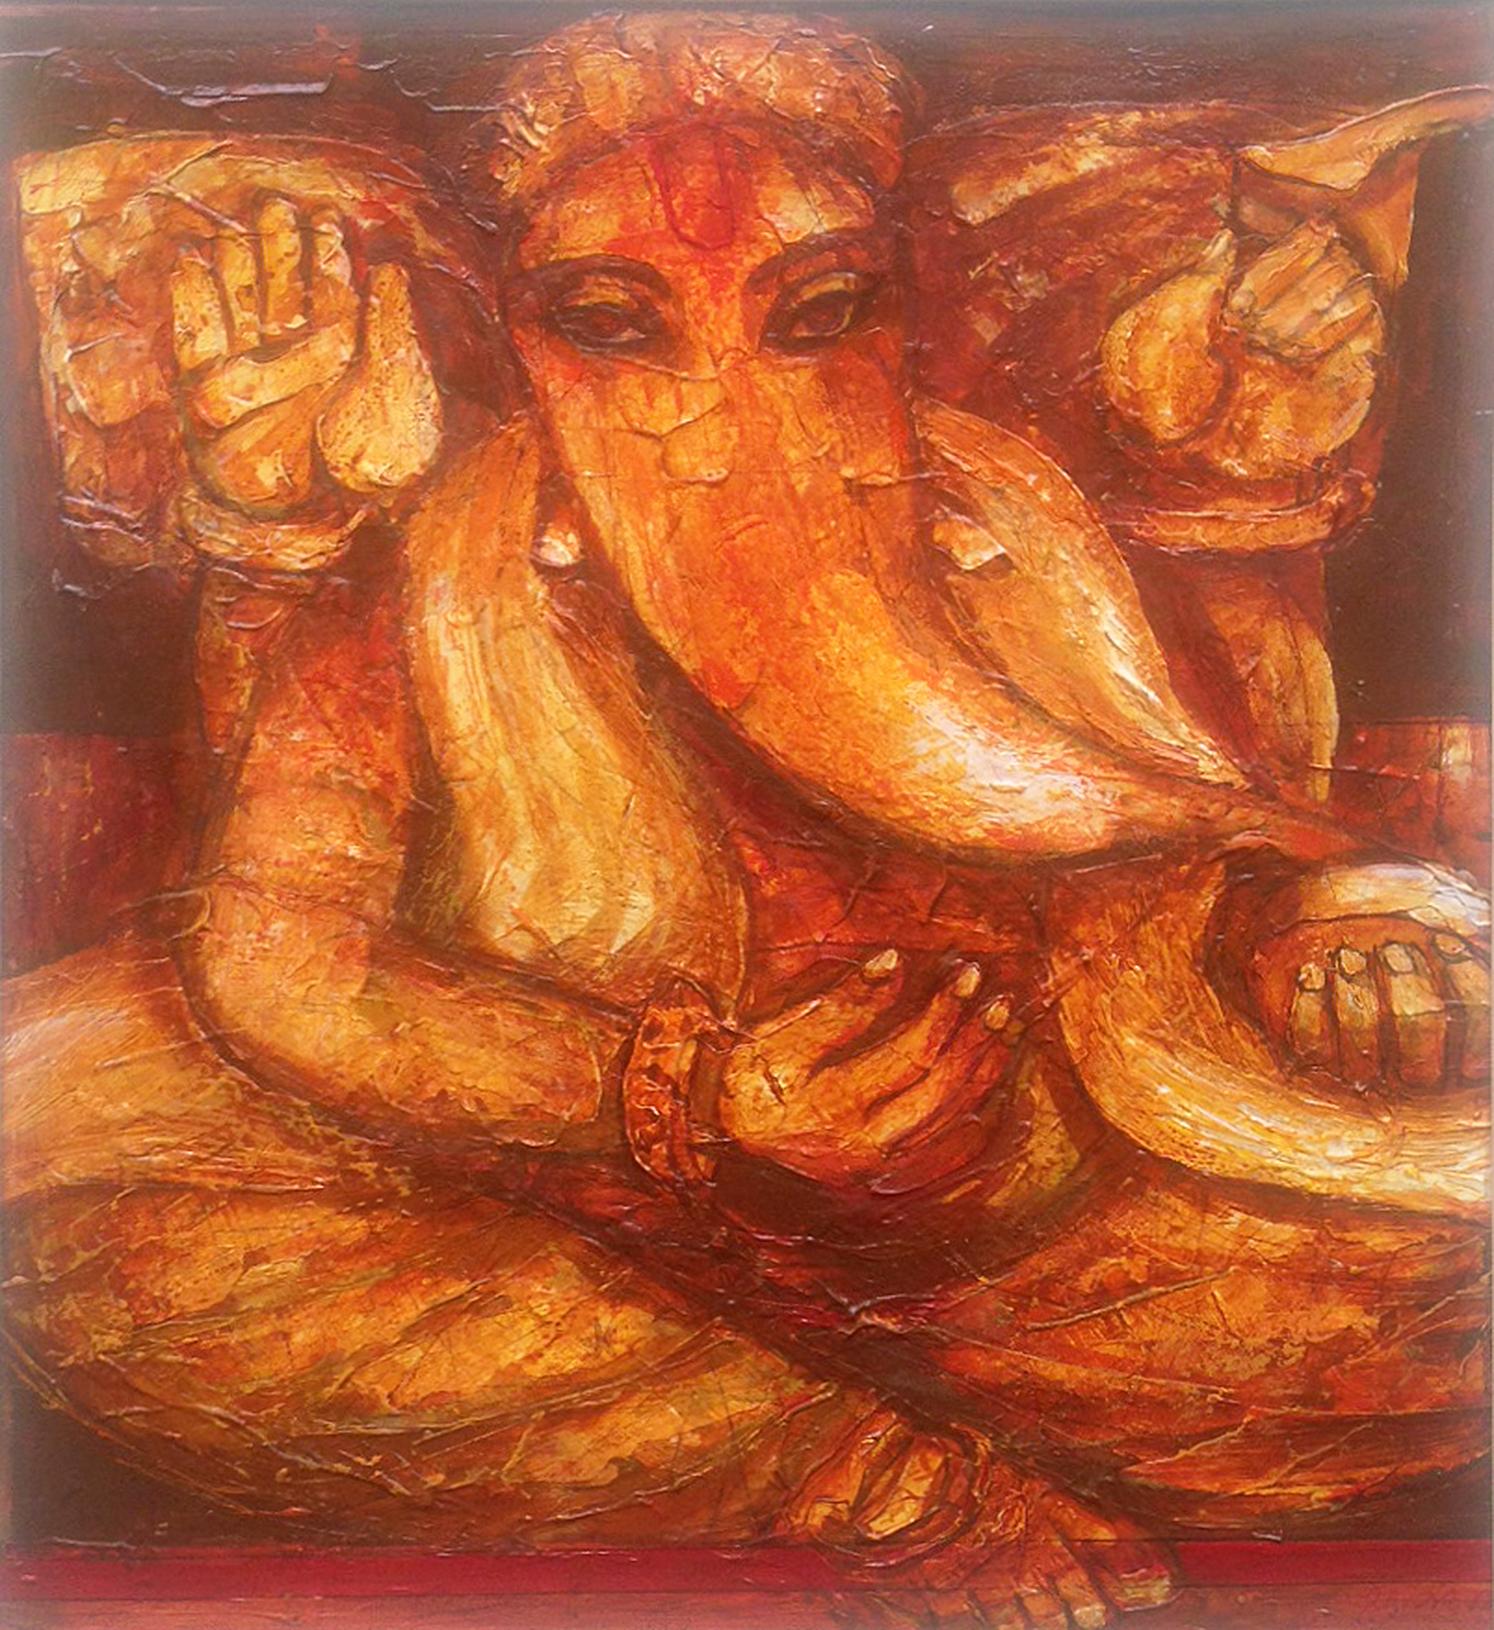 Arup Das Figurative Painting - Ganesha, Hindu God, Mythology, Acrylic on canvas, Red by Indian Artist"In Stock"